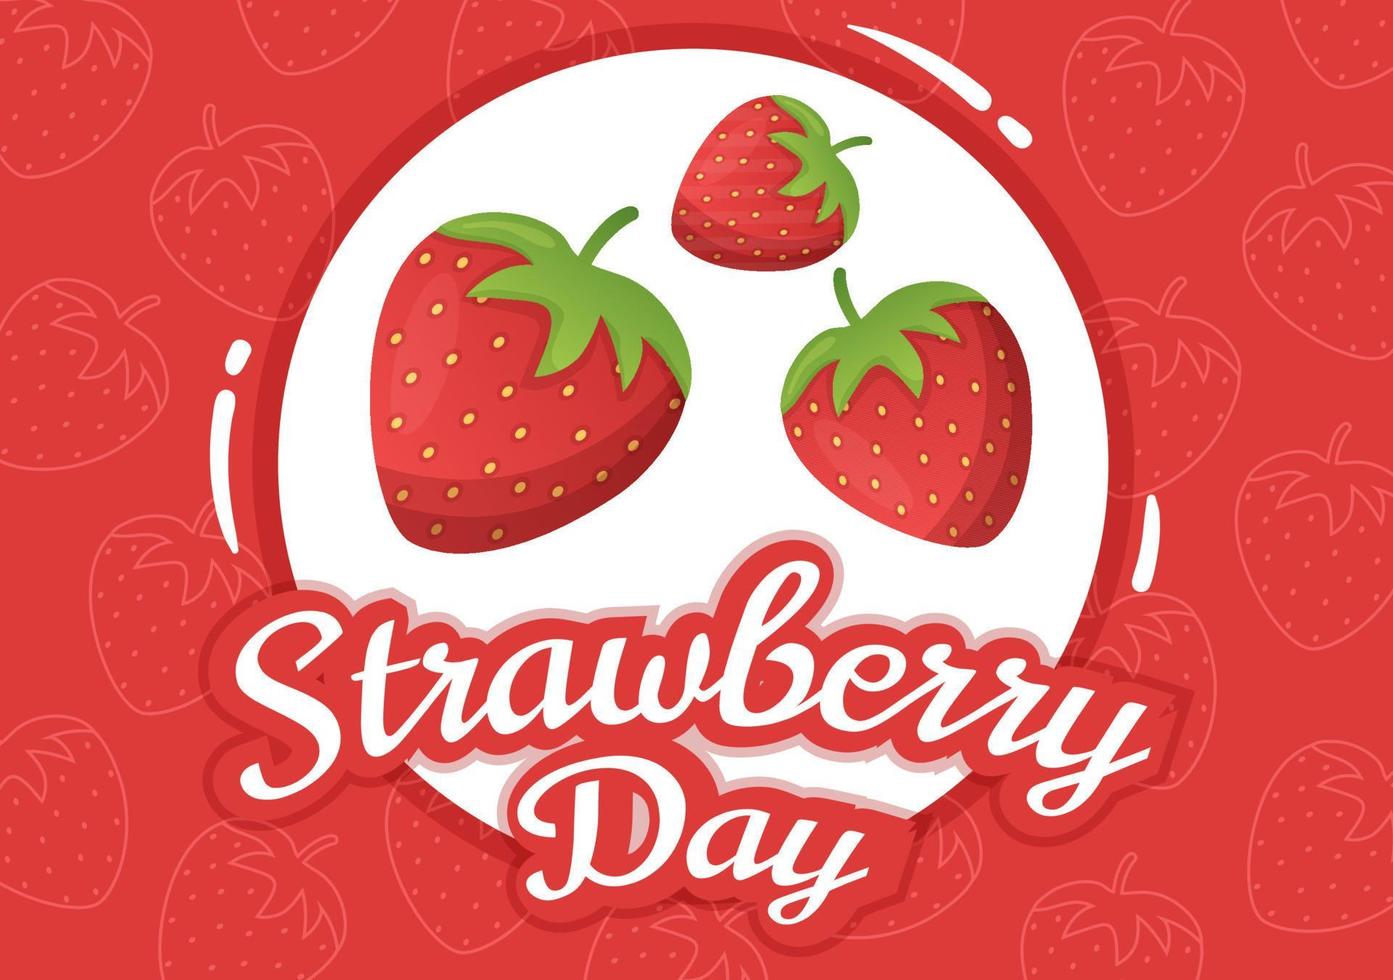 National Strawberry Day on February 27 to Celebrate the Sweet Little Red Fruit in Flat Cartoon Hand Drawn Templates Illustration vector